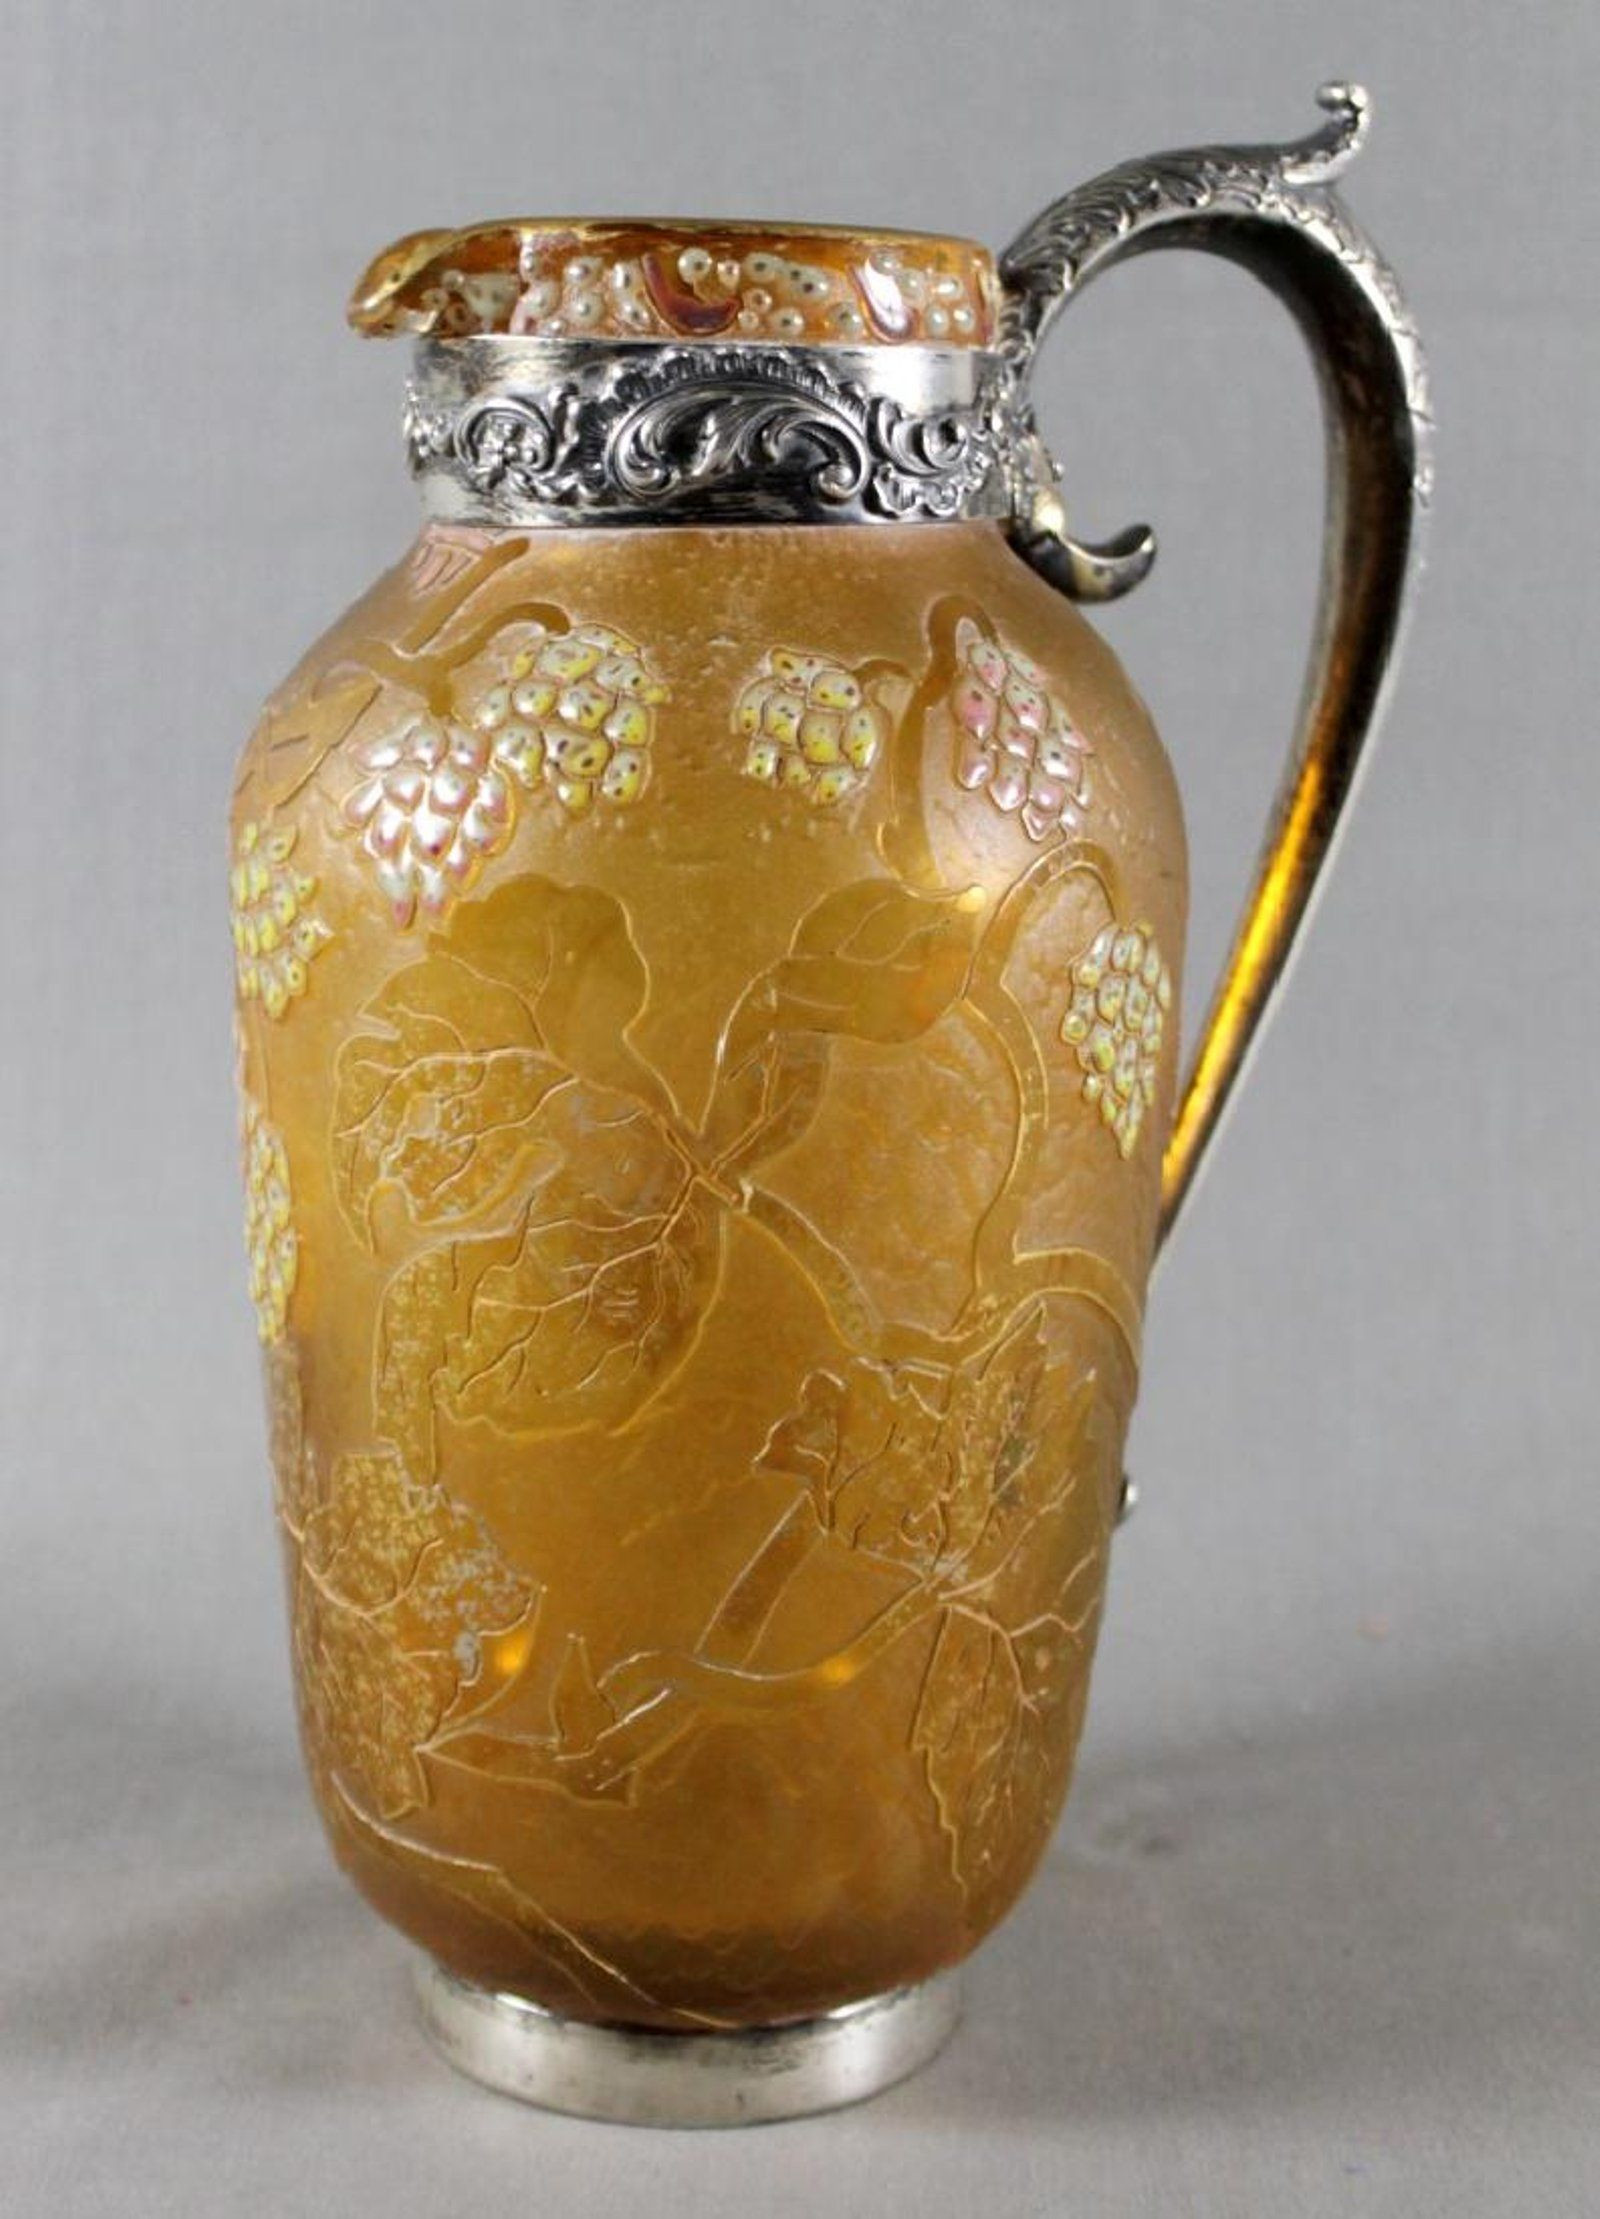 10 Spectacular Antique Yellow Glass Vase 2024 free download antique yellow glass vase of daum nancy vase w silver handles and mounts daum pinterest pertaining to daum nancy vase w silver handles and mounts